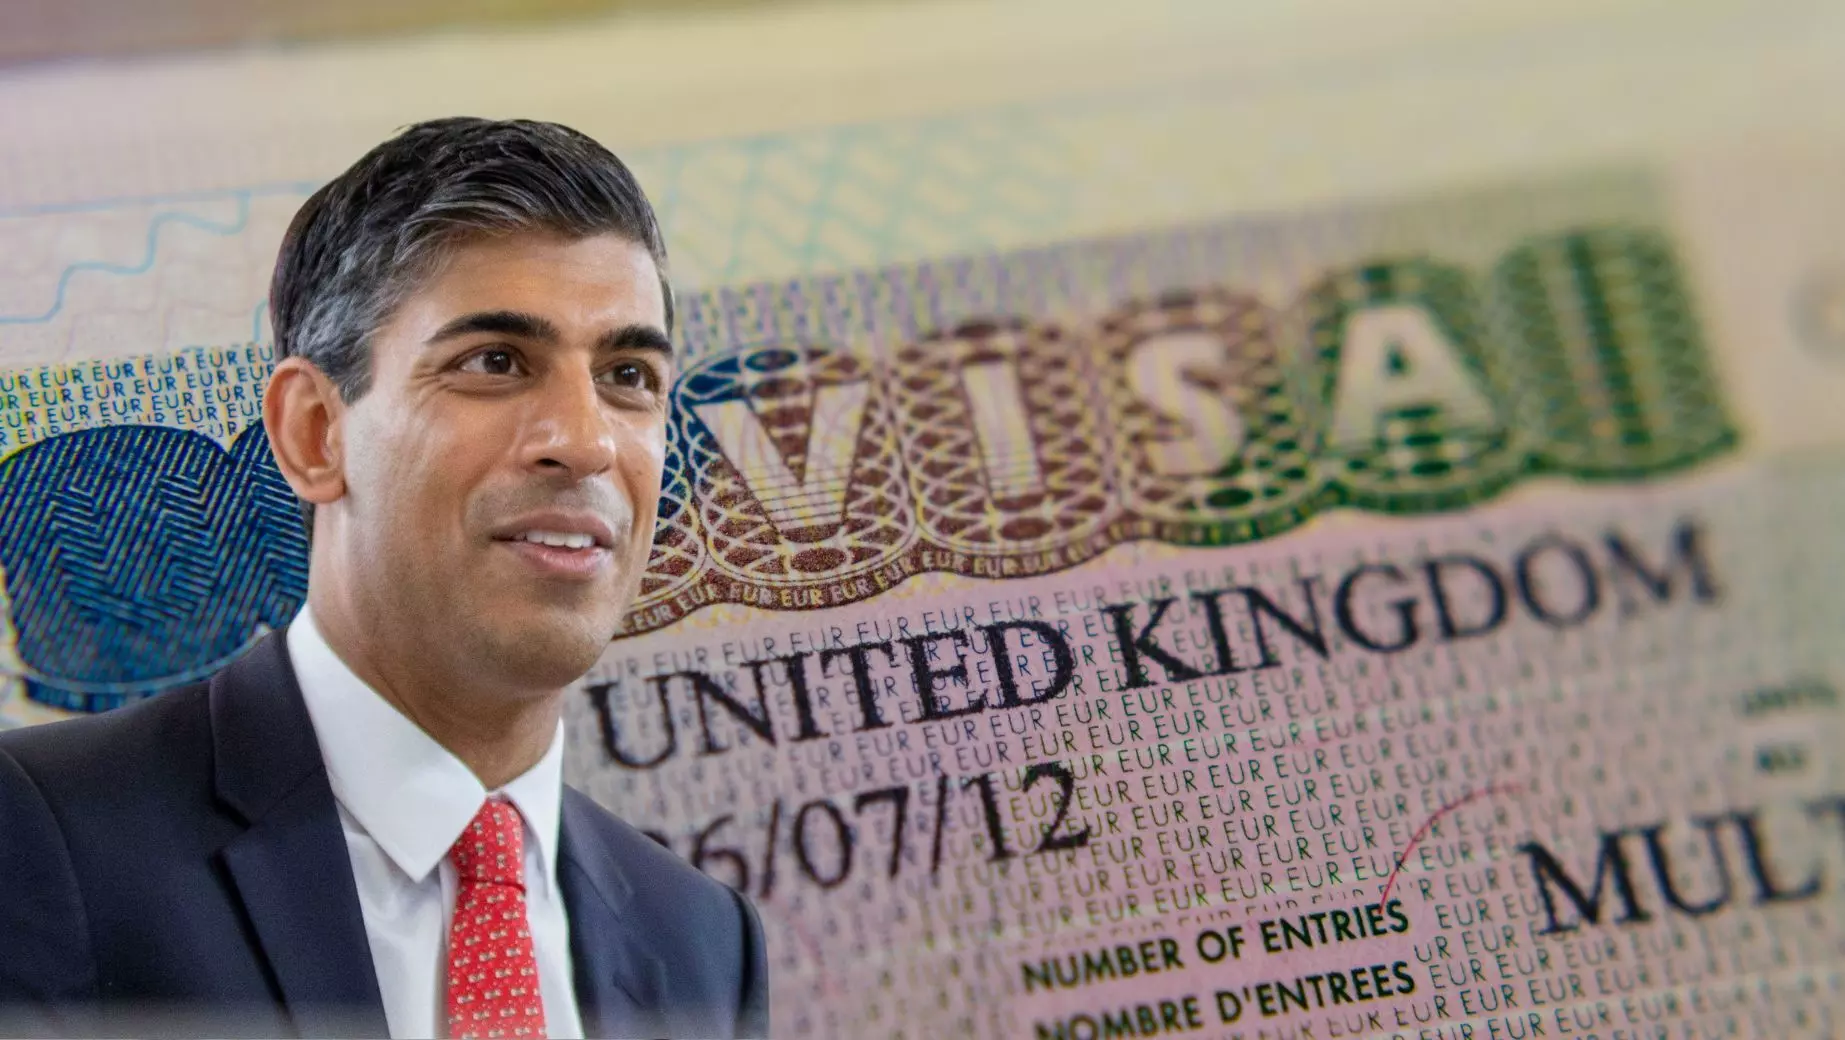 UK announces foreign workers visas regulations to cut immigration